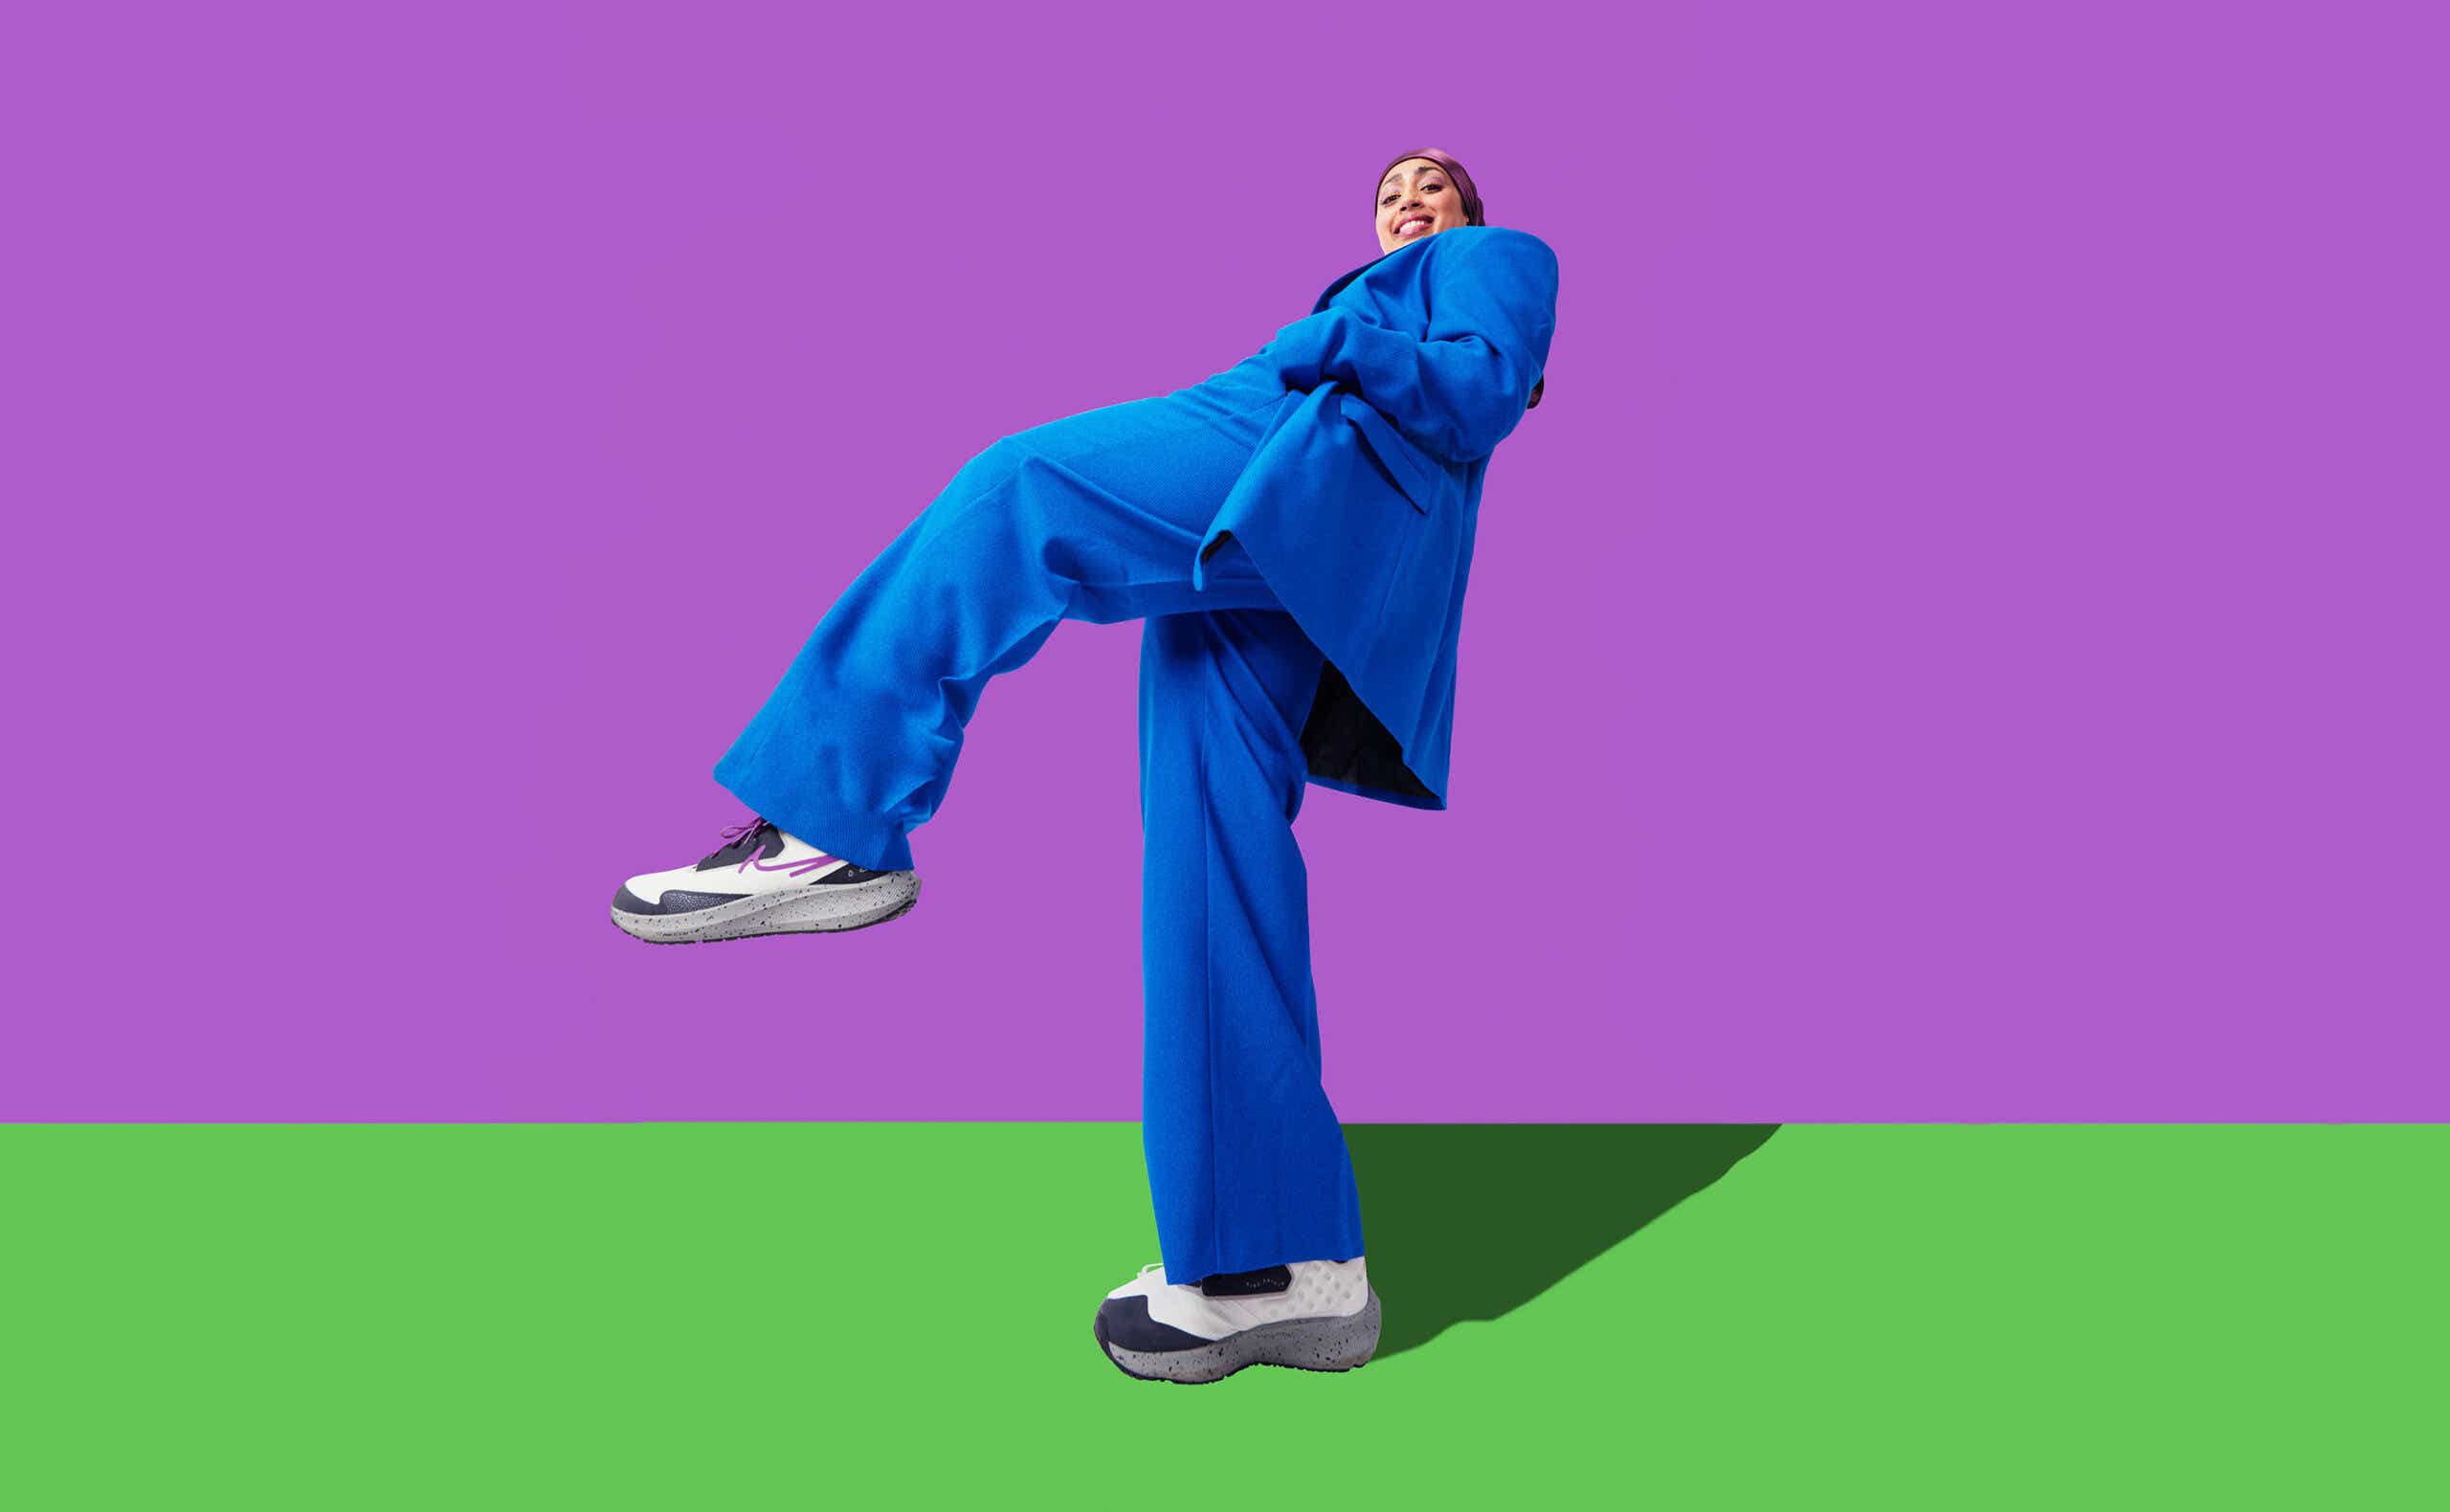 A woman in a blue suit steps high